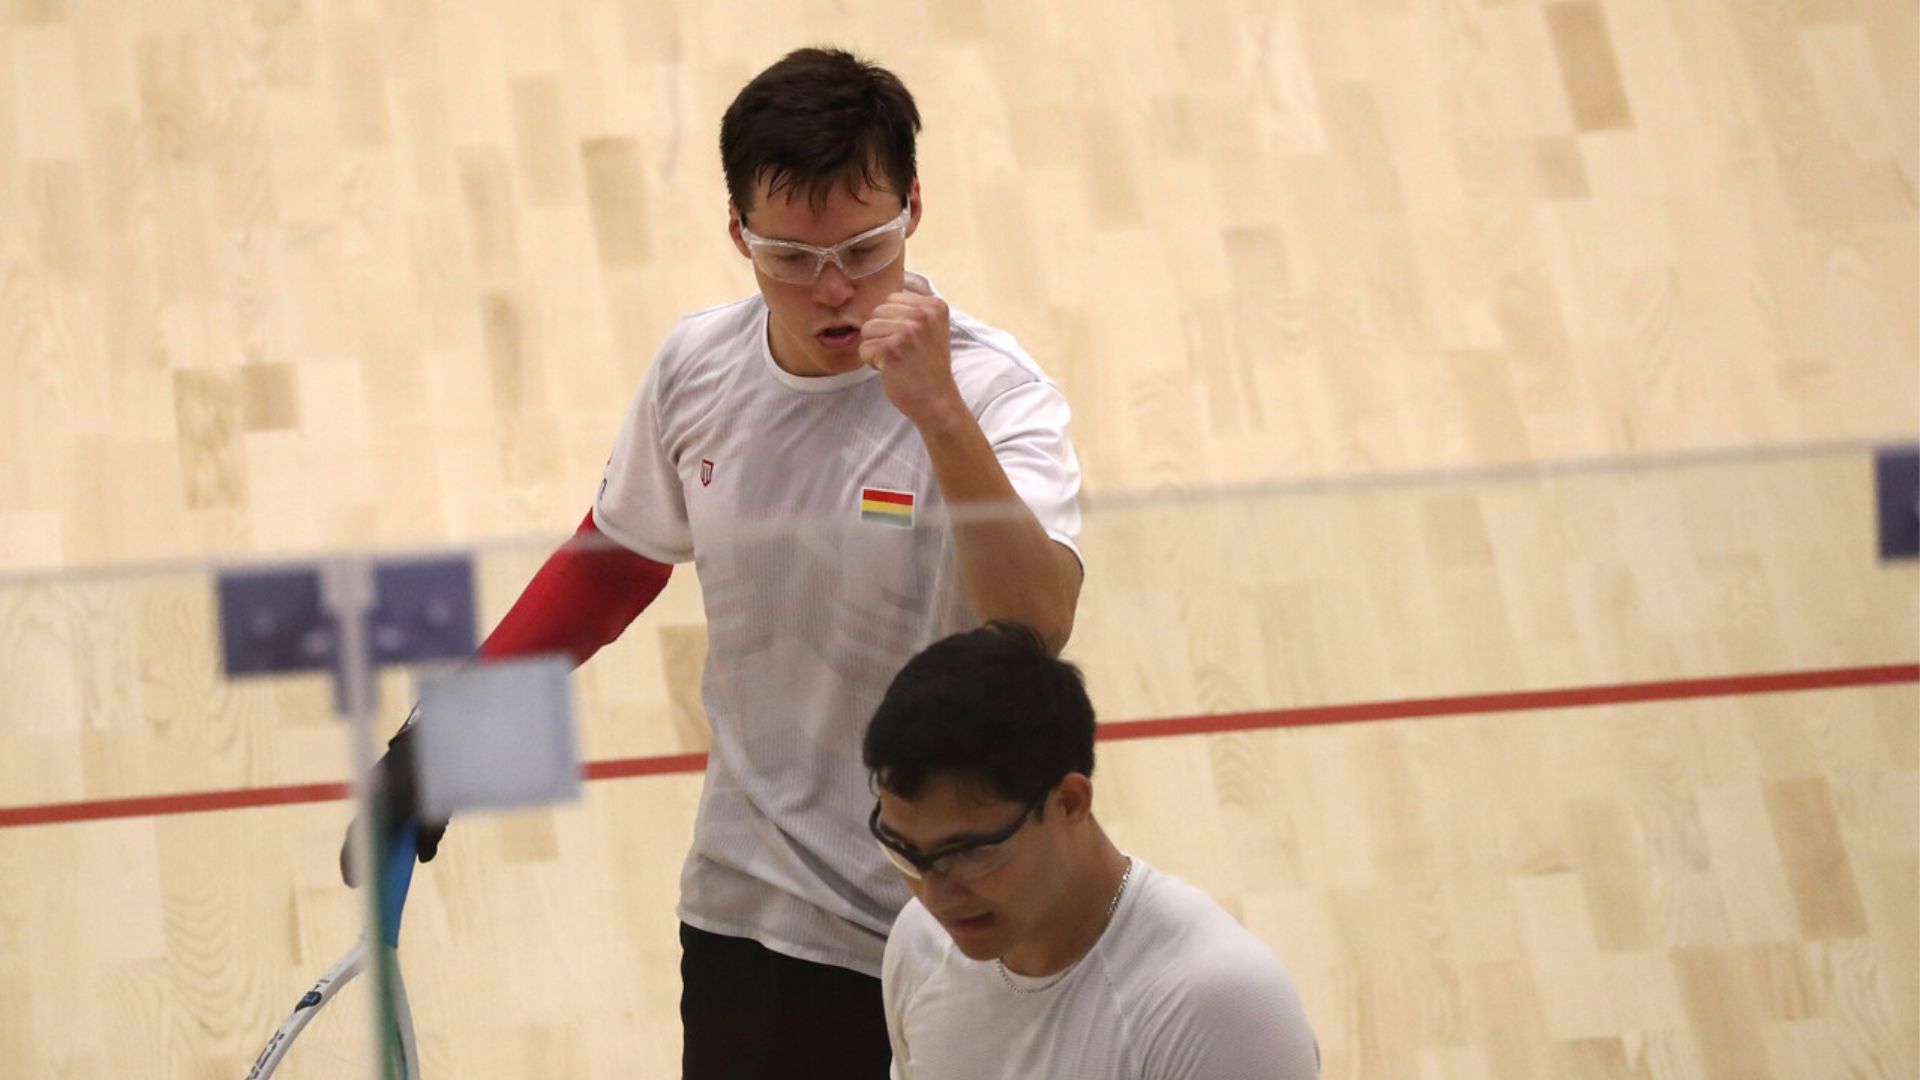 Bolivia beats Canada and retains gold in male’s racquetball